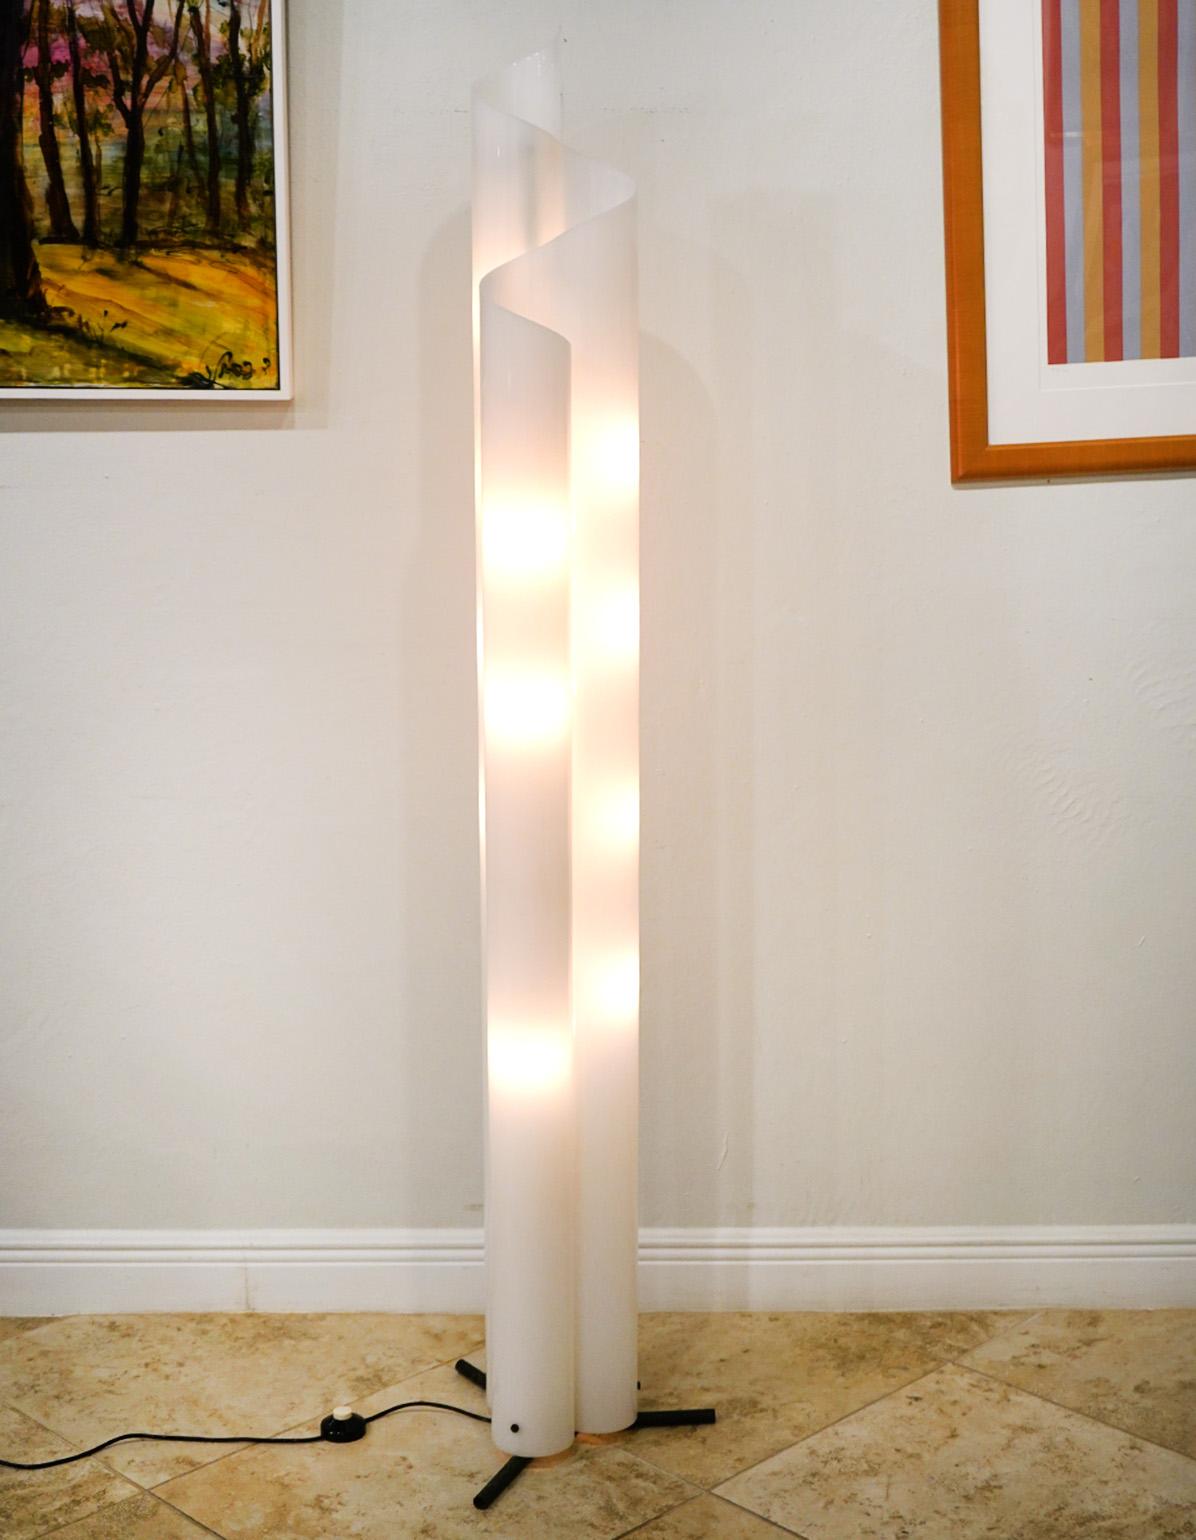 Early chimera floor lamp by Vico Magistretti for Artemide Milano. This is an early edition based on the metal base. Good working condition. 72